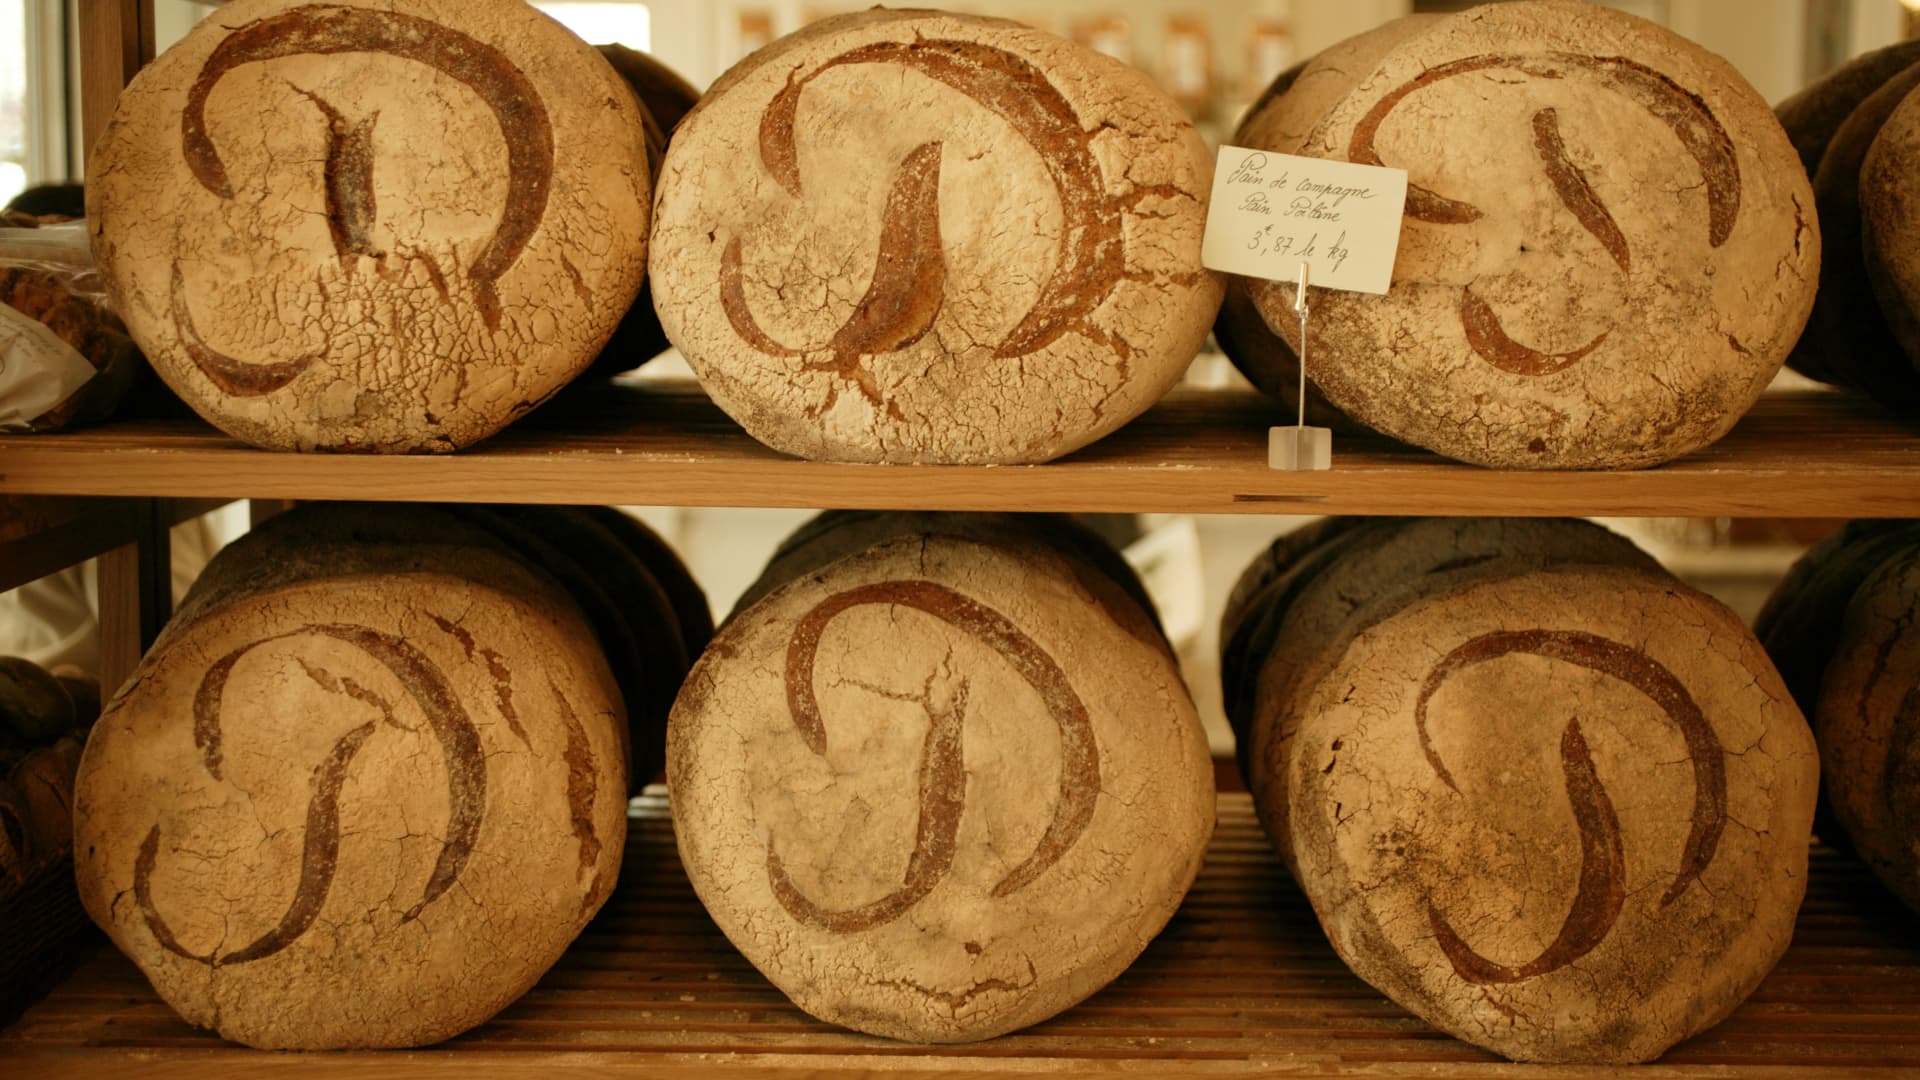 Fresh loaves of bread at one of Poilane's bakeries in Paris. The company said bakers undergo nine months of training to learn the trade.